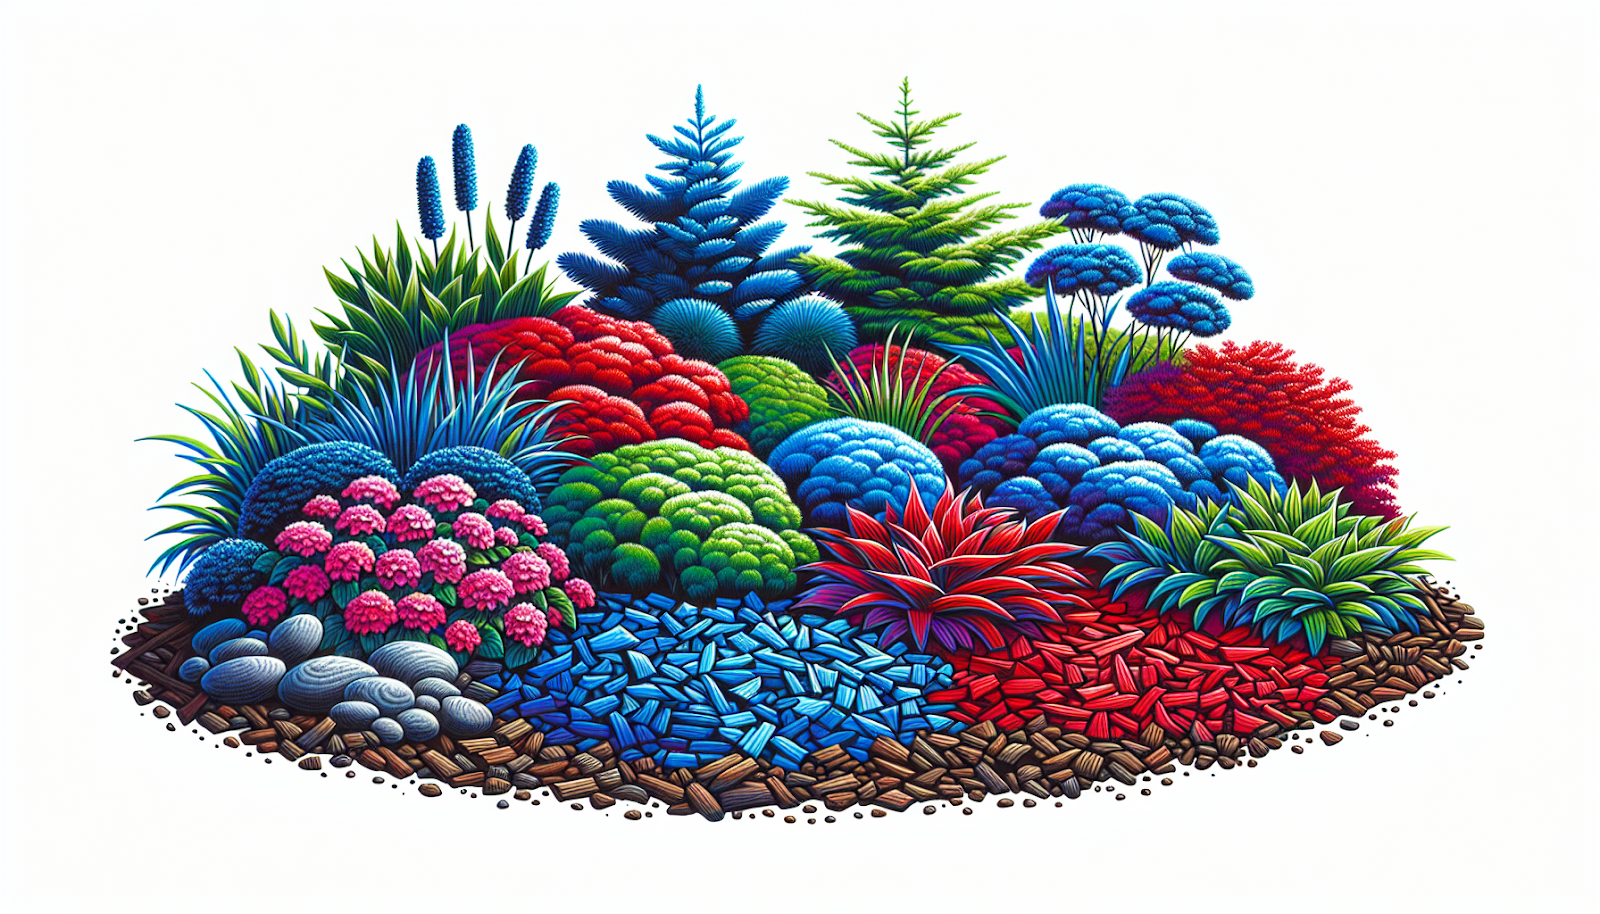 Illustration of colorful and decorative mulches in a garden